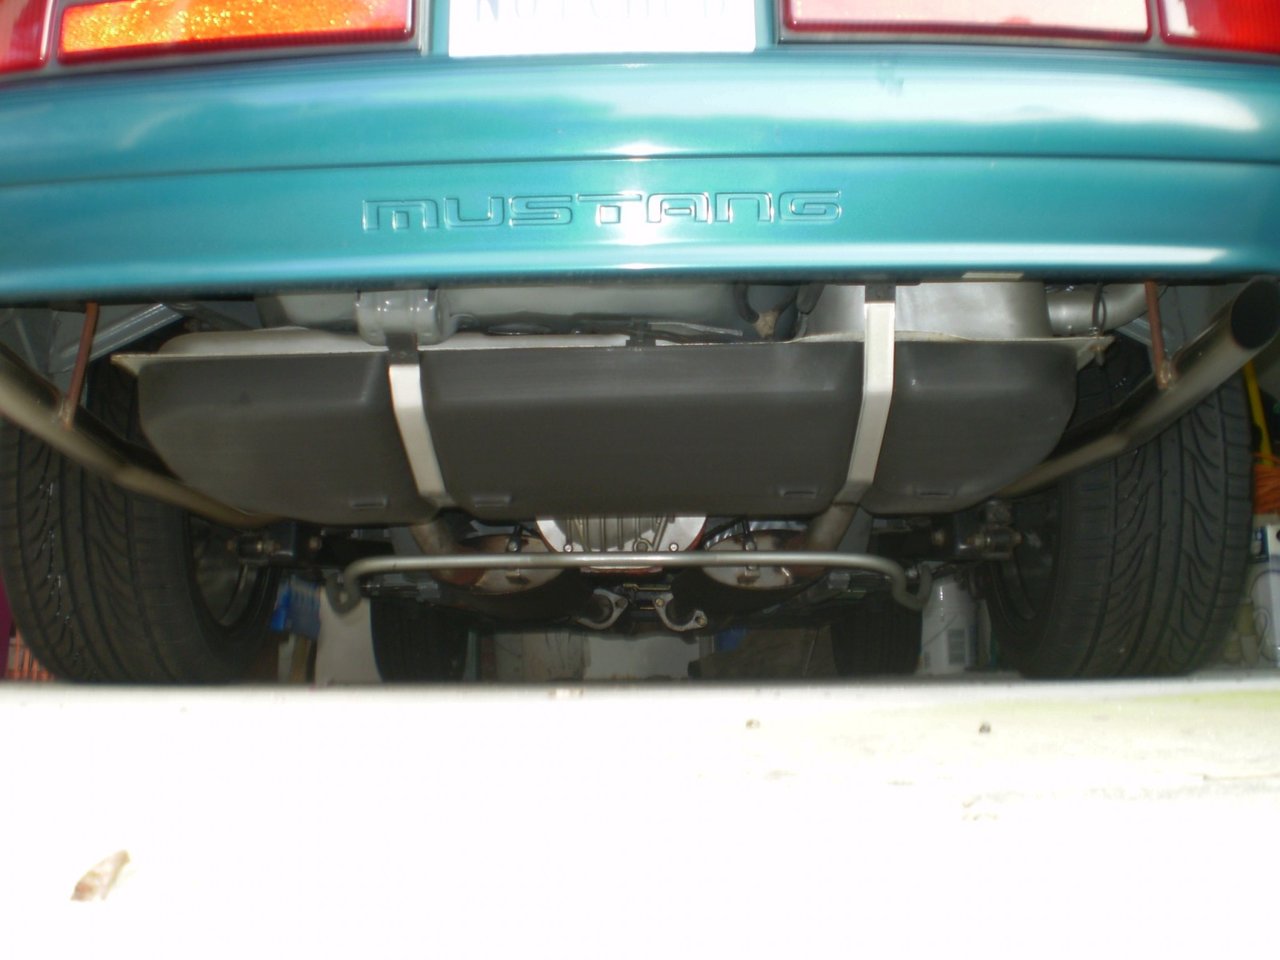 NOTCHED rear end